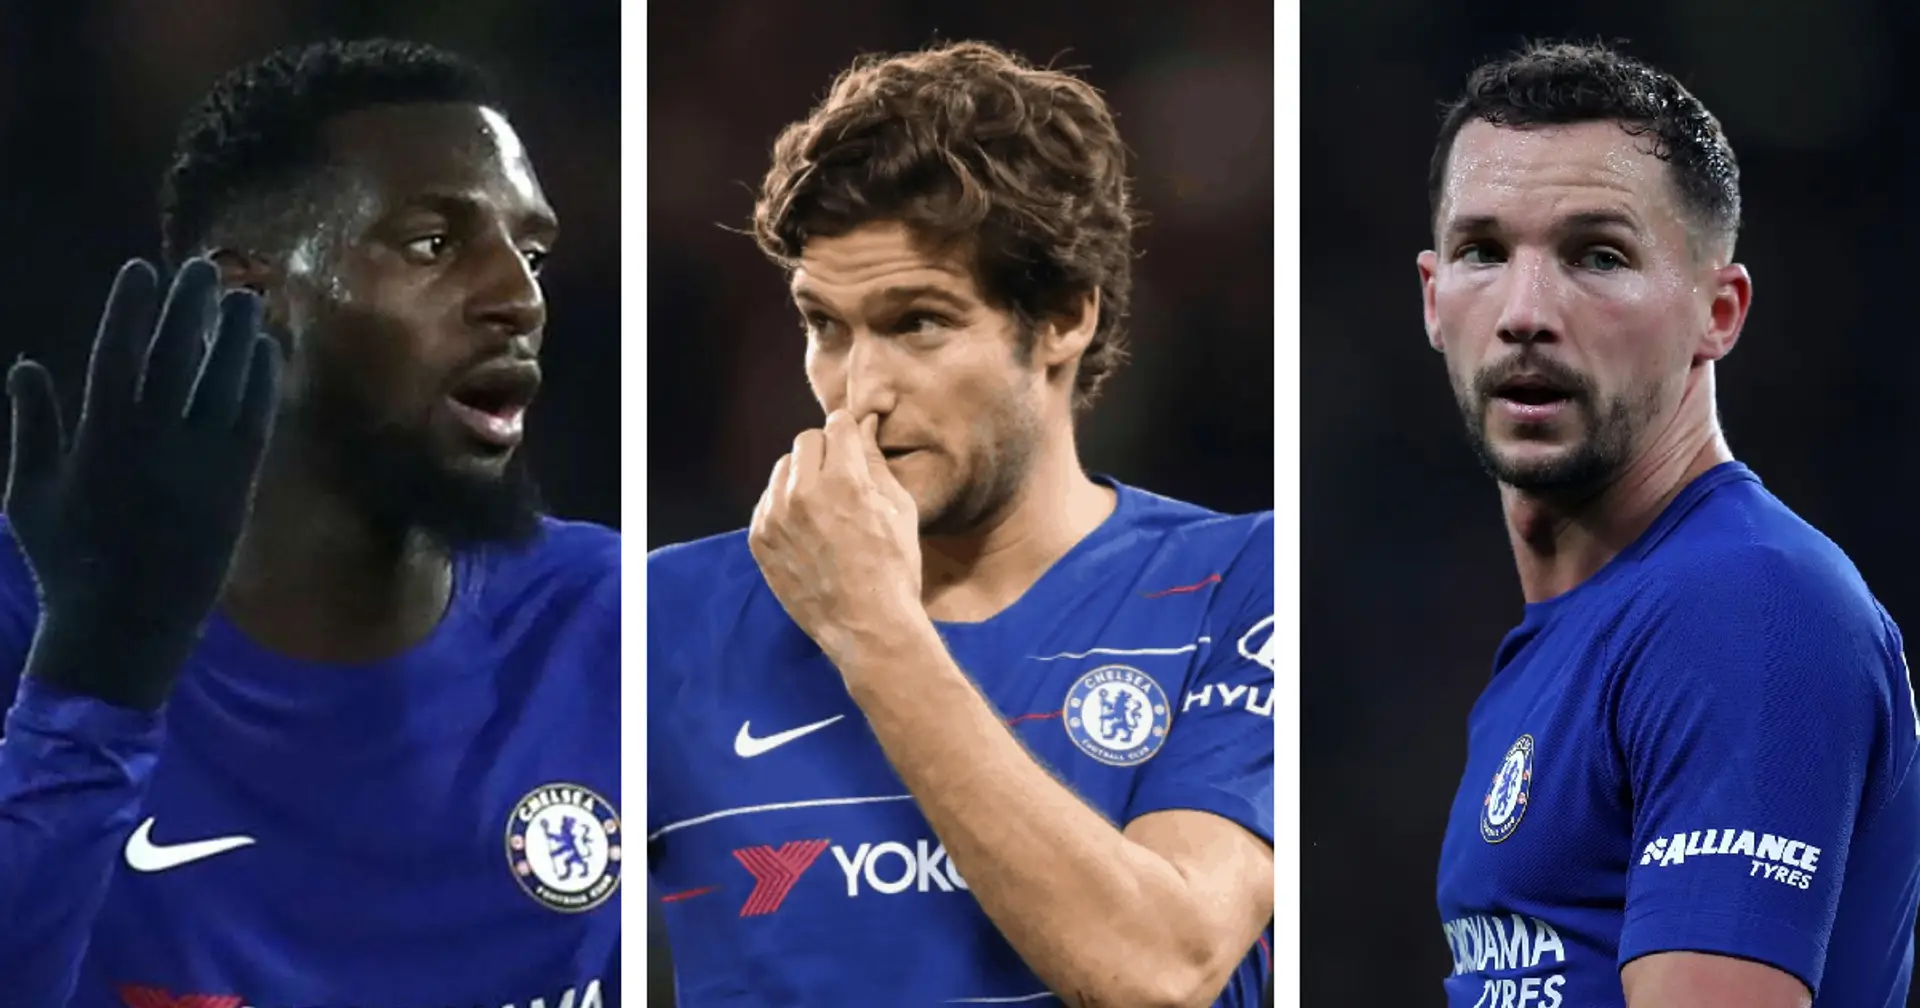 How much money Chelsea could potentially get from selling 'deadwood' off to finance new transfers